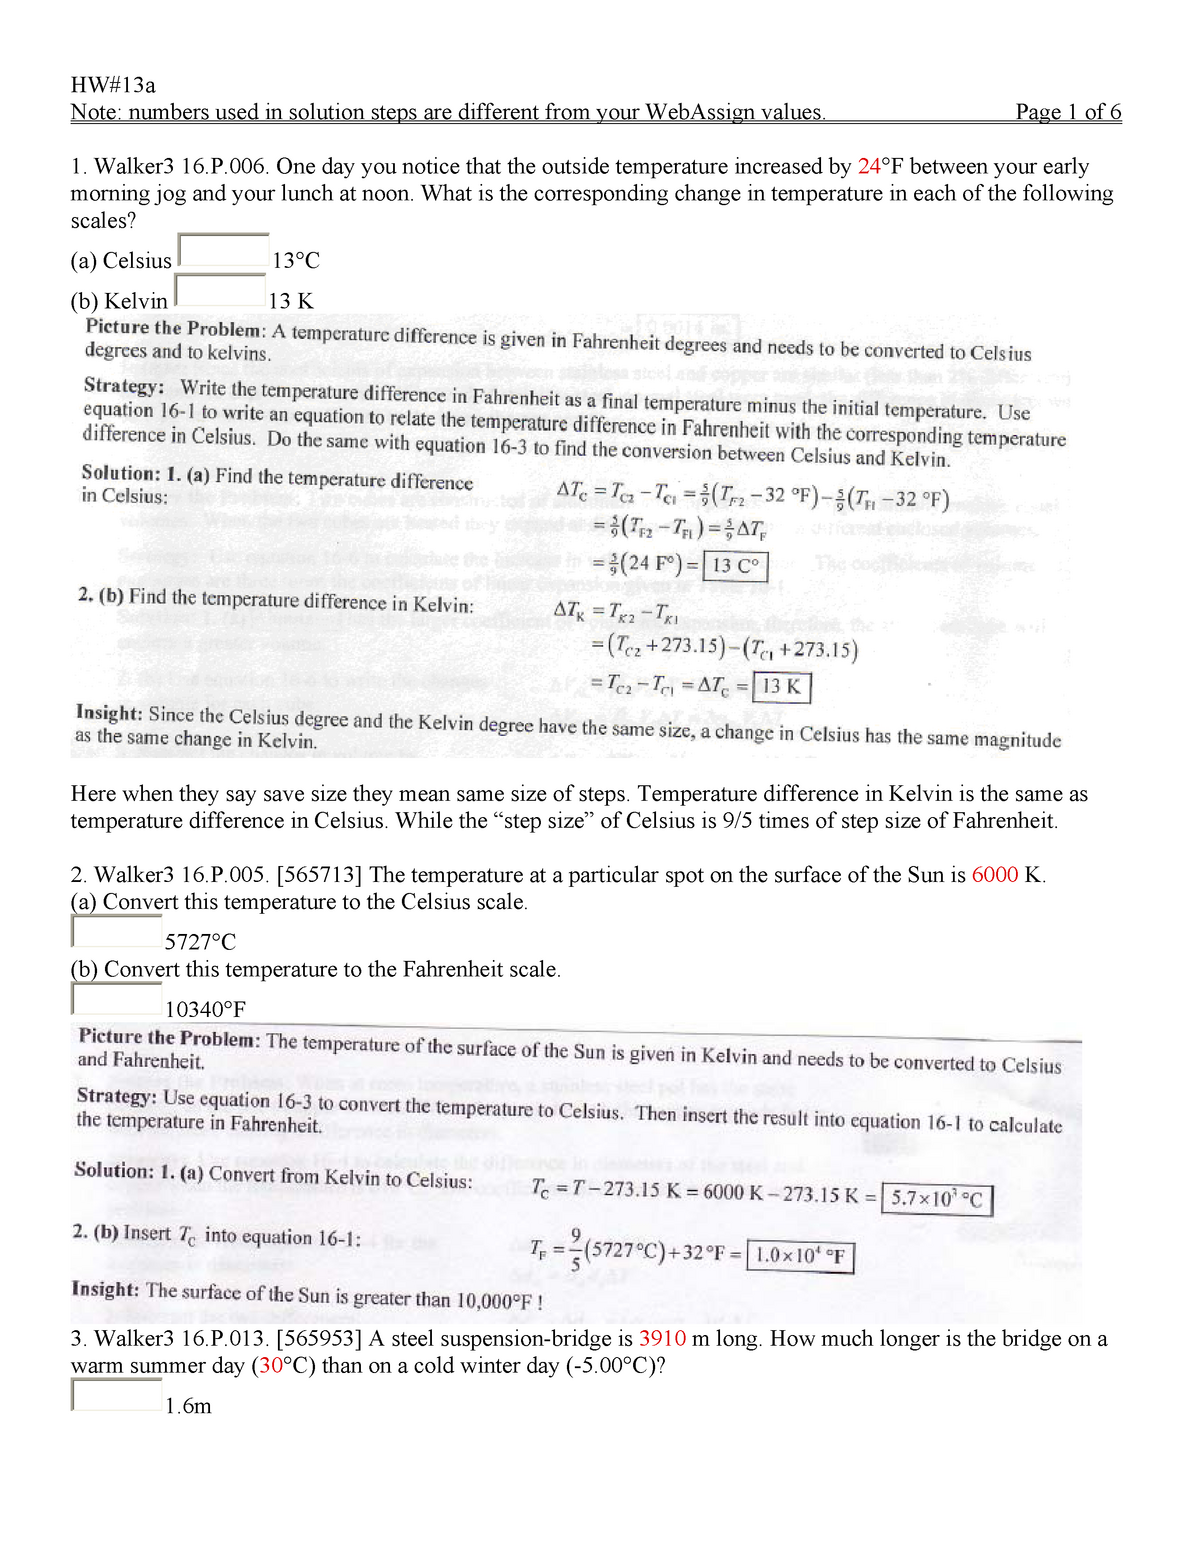 Hw13a - Homework assignment 13a - Note: numbers used in solution